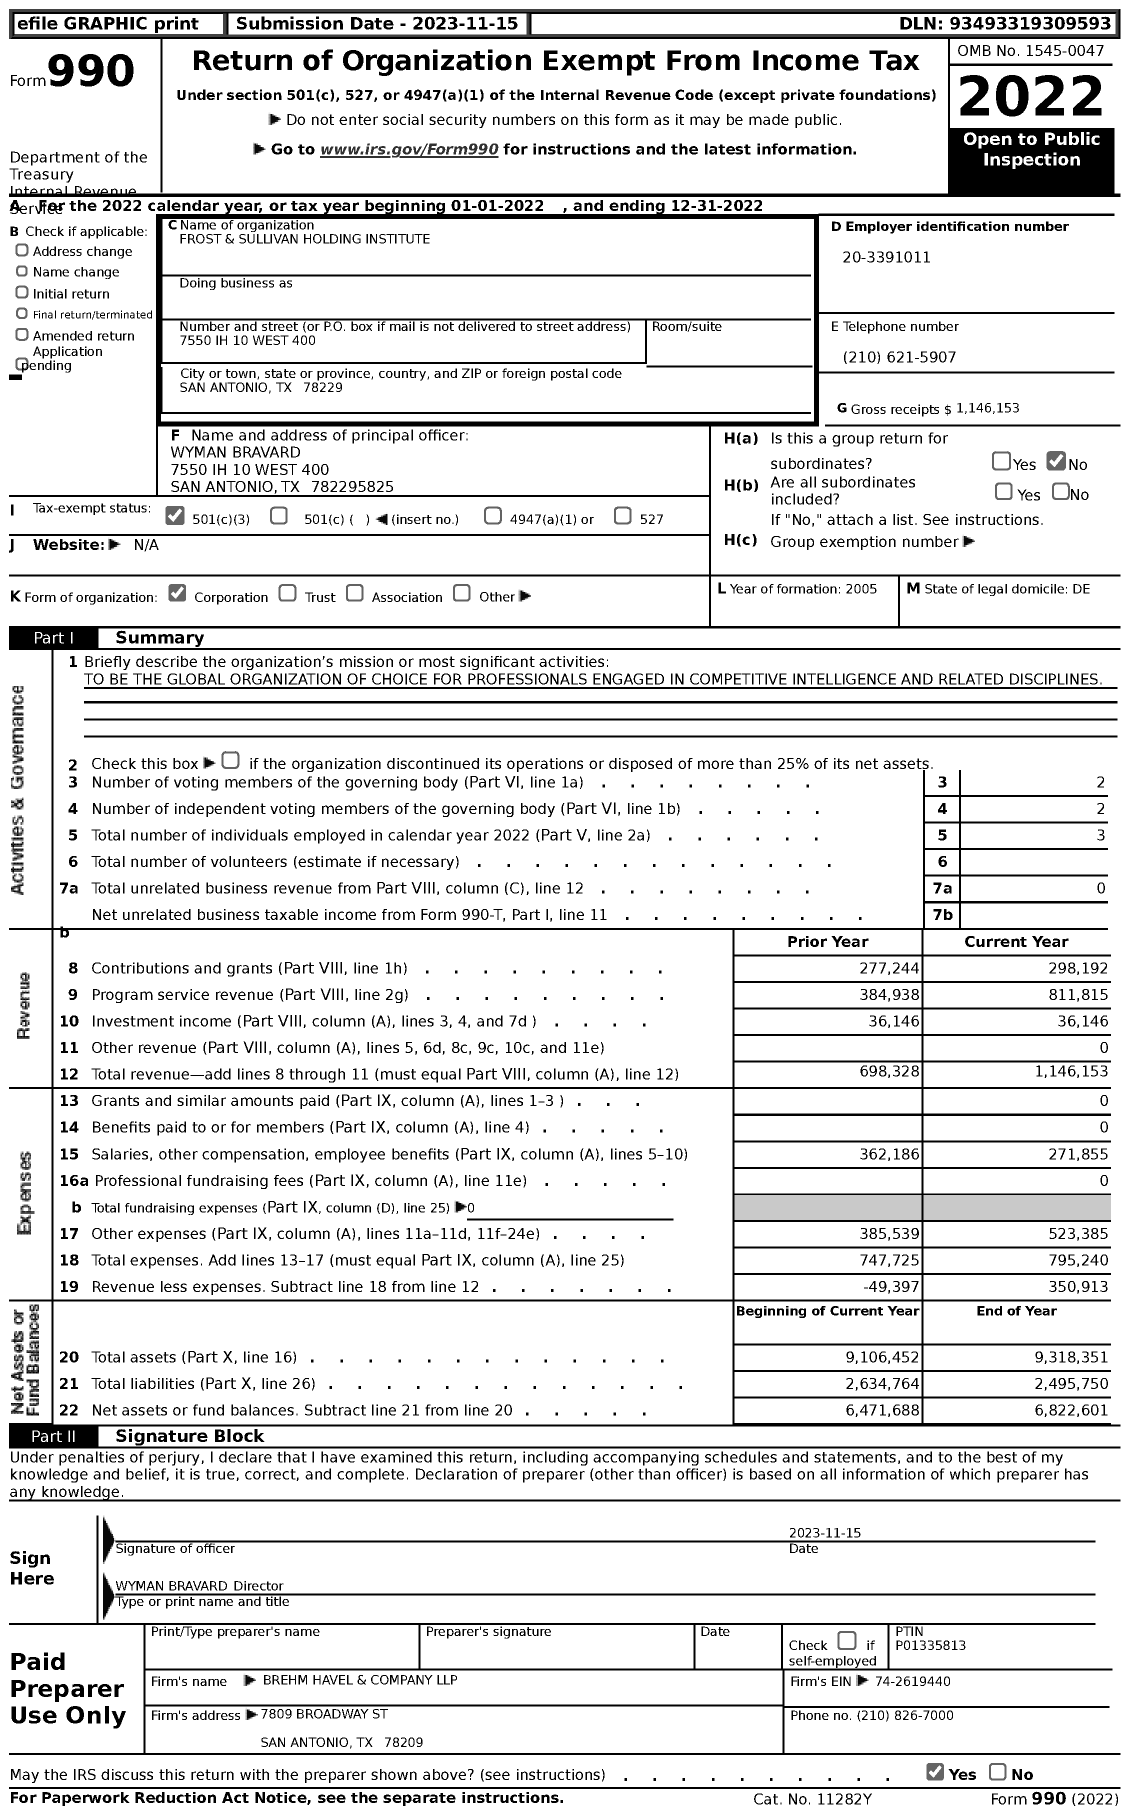 Image of first page of 2022 Form 990 for Frost and Sullivan Holding Institute